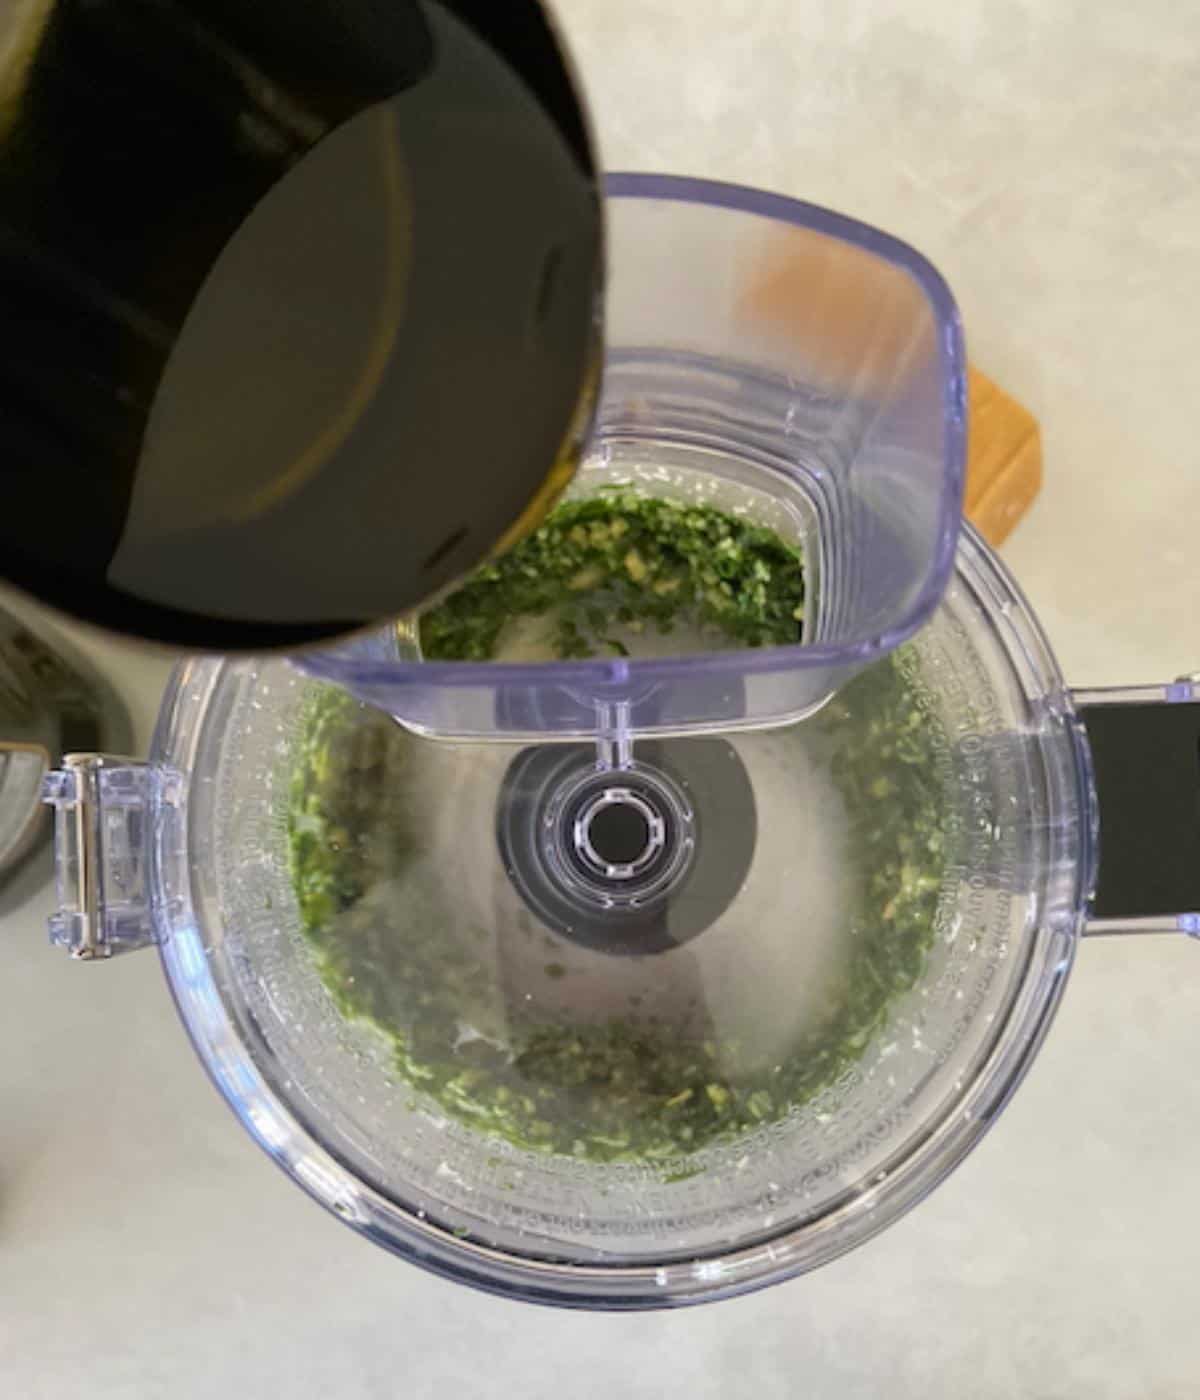 Slowly pouring olive oil into food processor